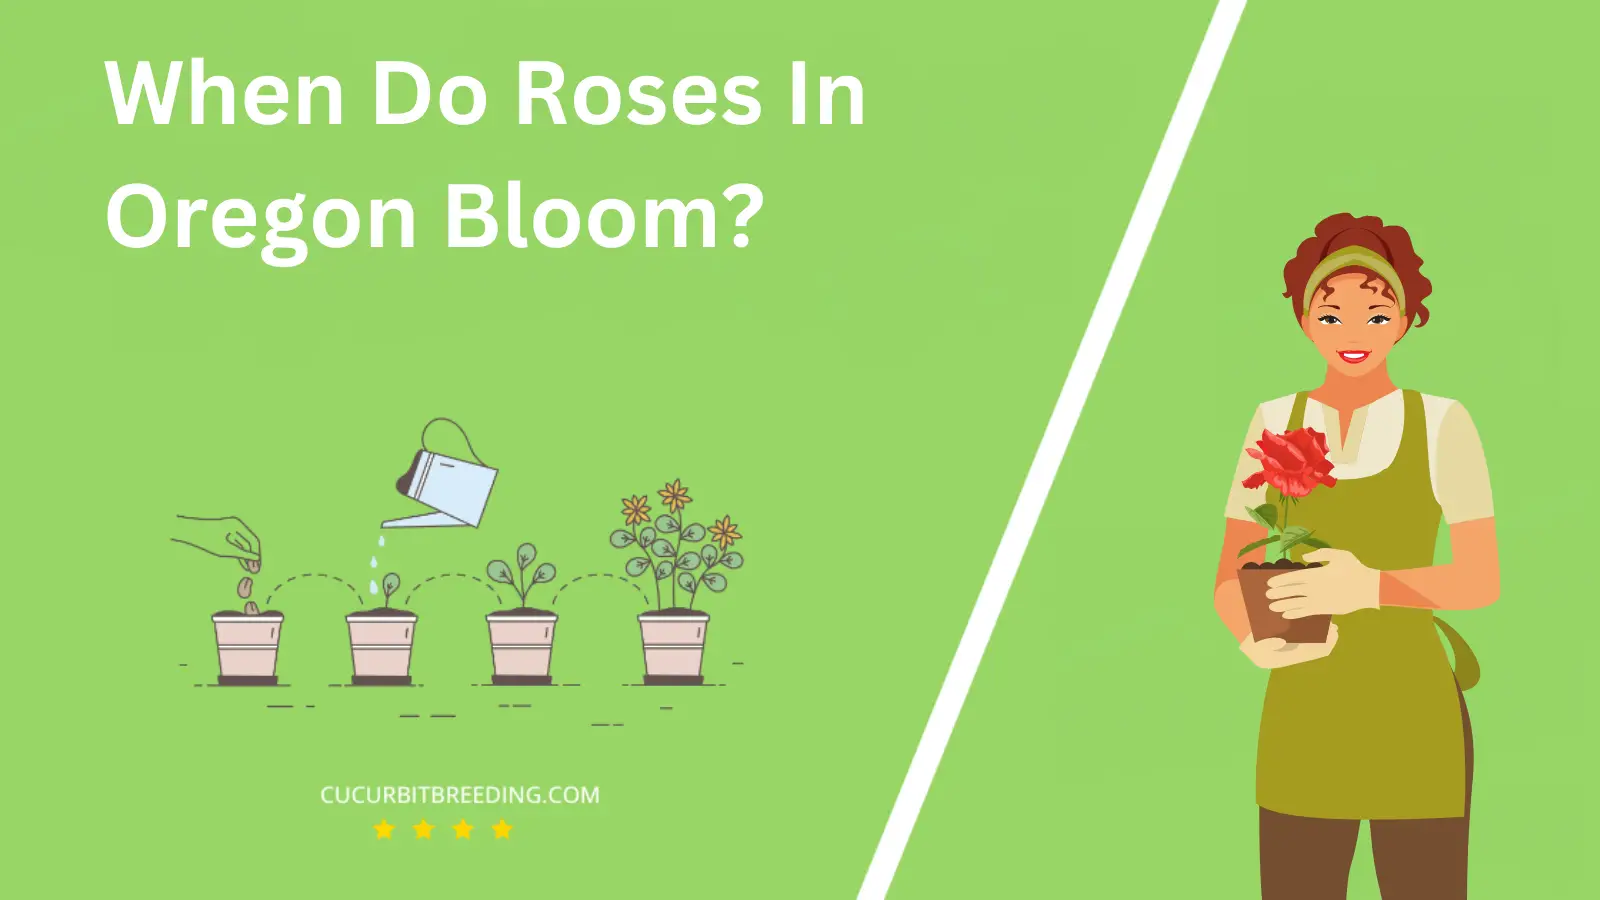 When Do Roses In Oregon Bloom?